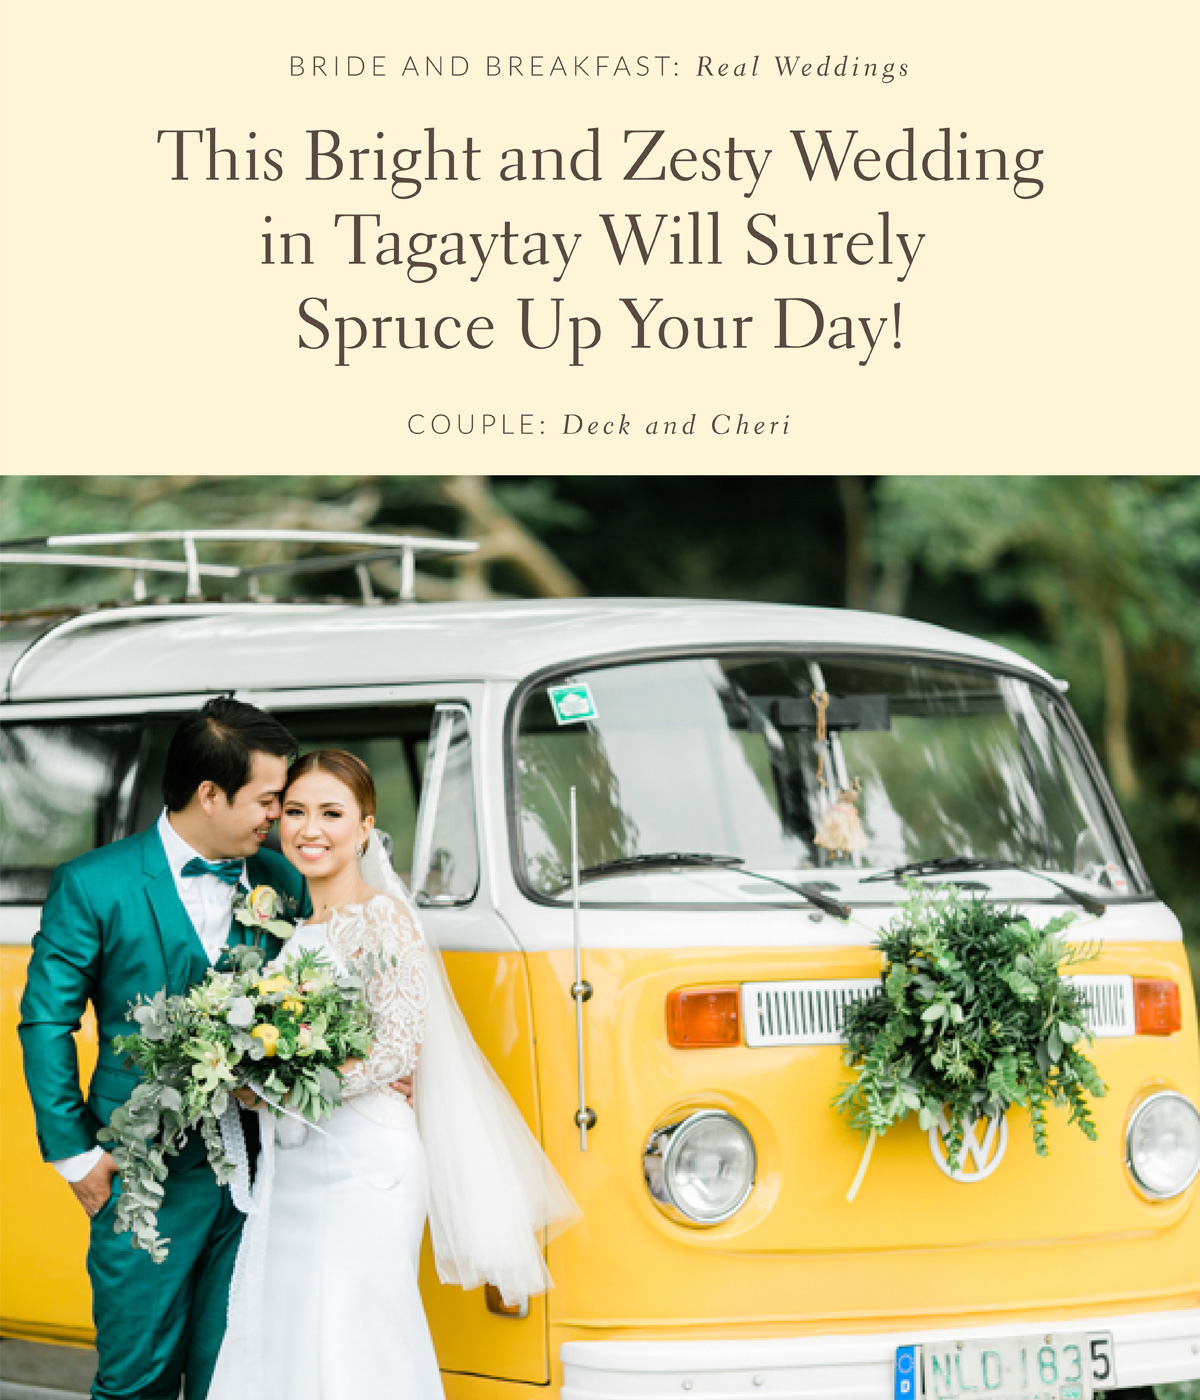 This Bright and Zesty Wedding in Tagaytay Will Surely Spruce Up Your Day!